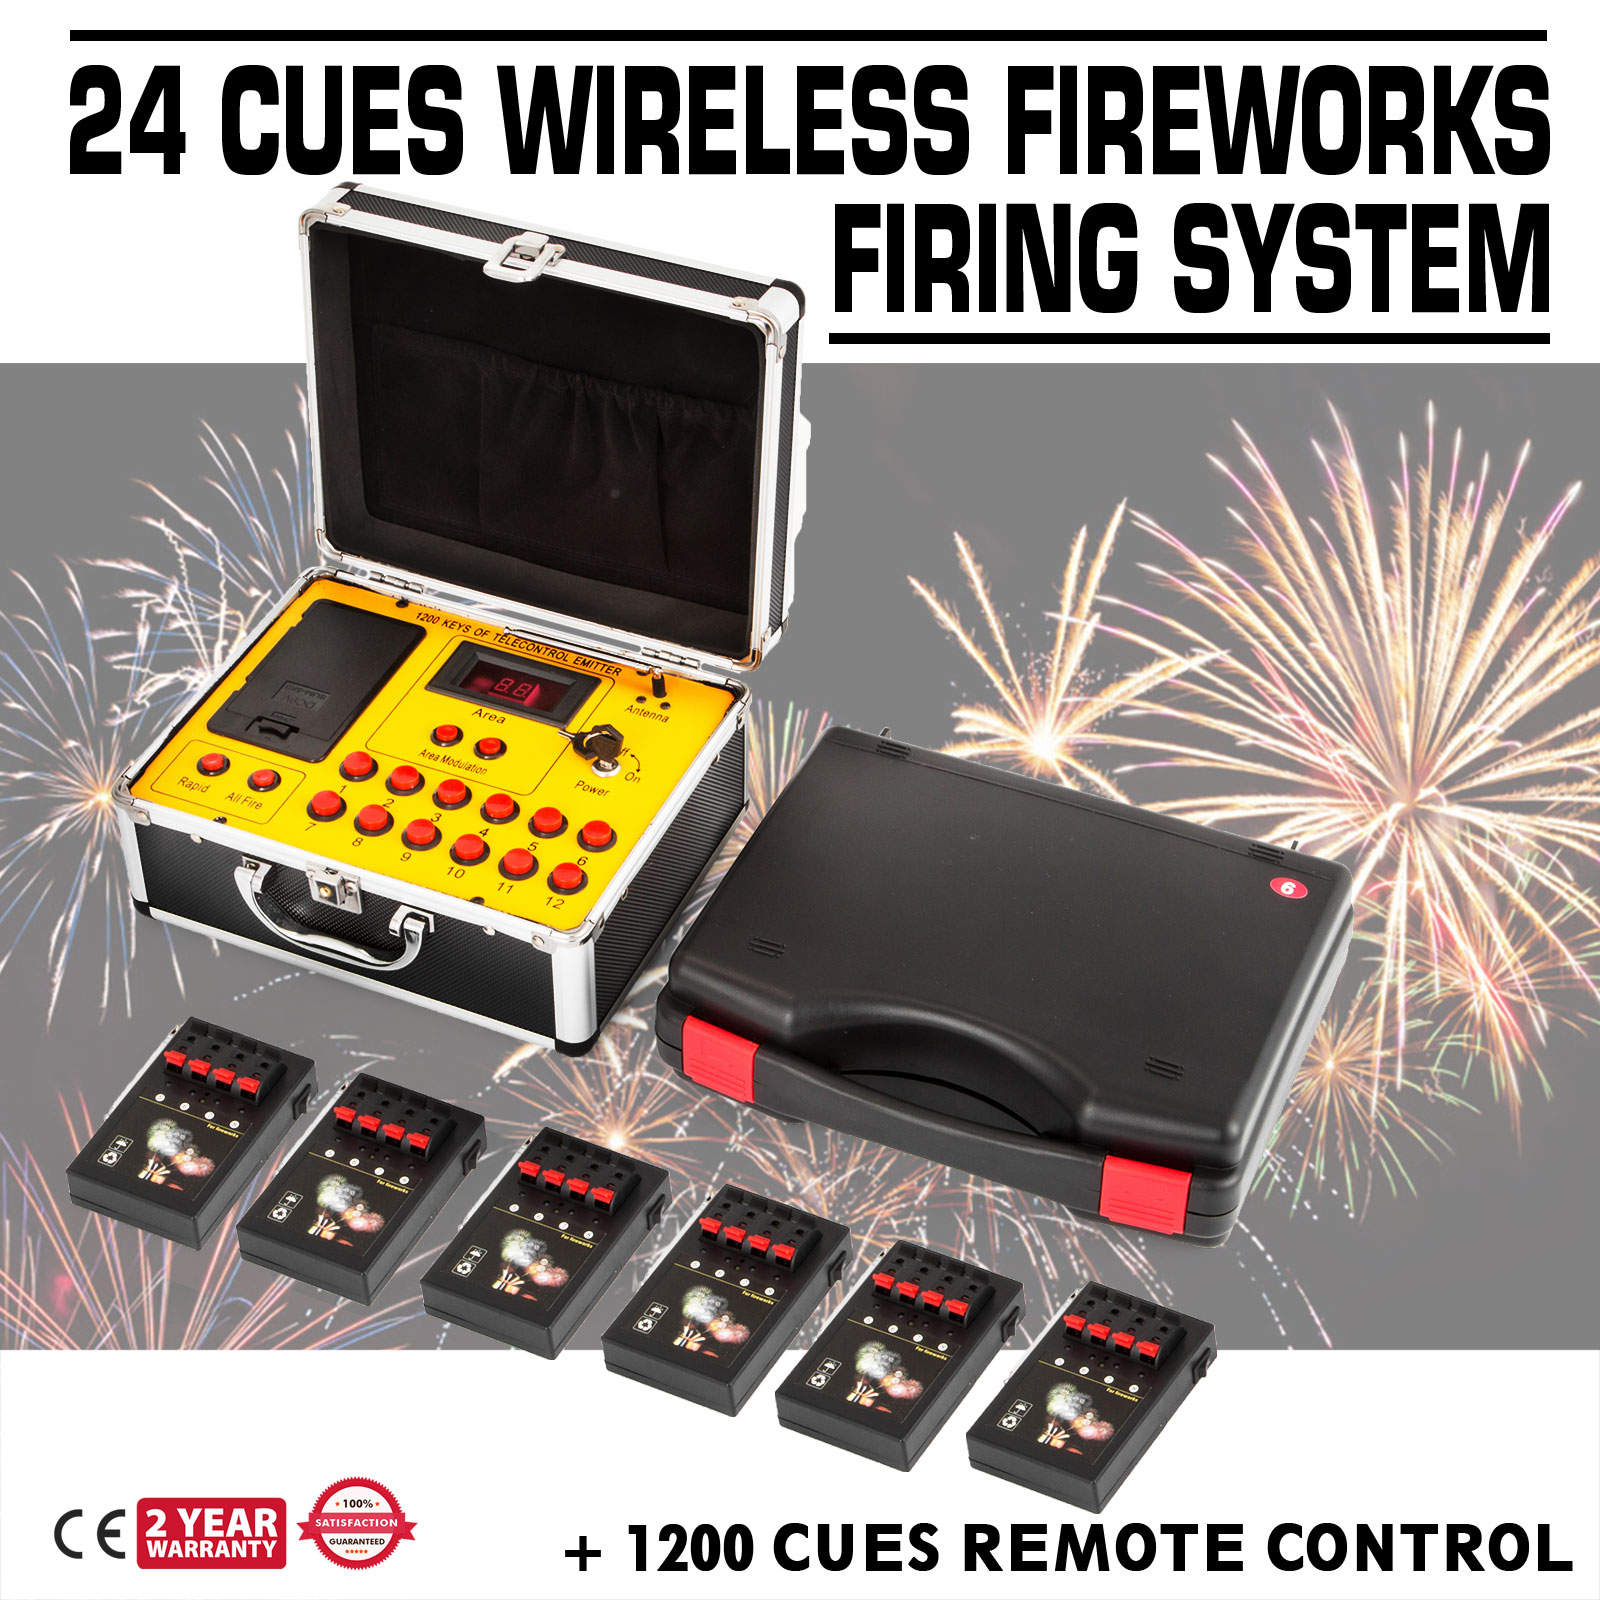 24-120 Cues Cold fireworks firing system Wedding 500M Remote wireless control